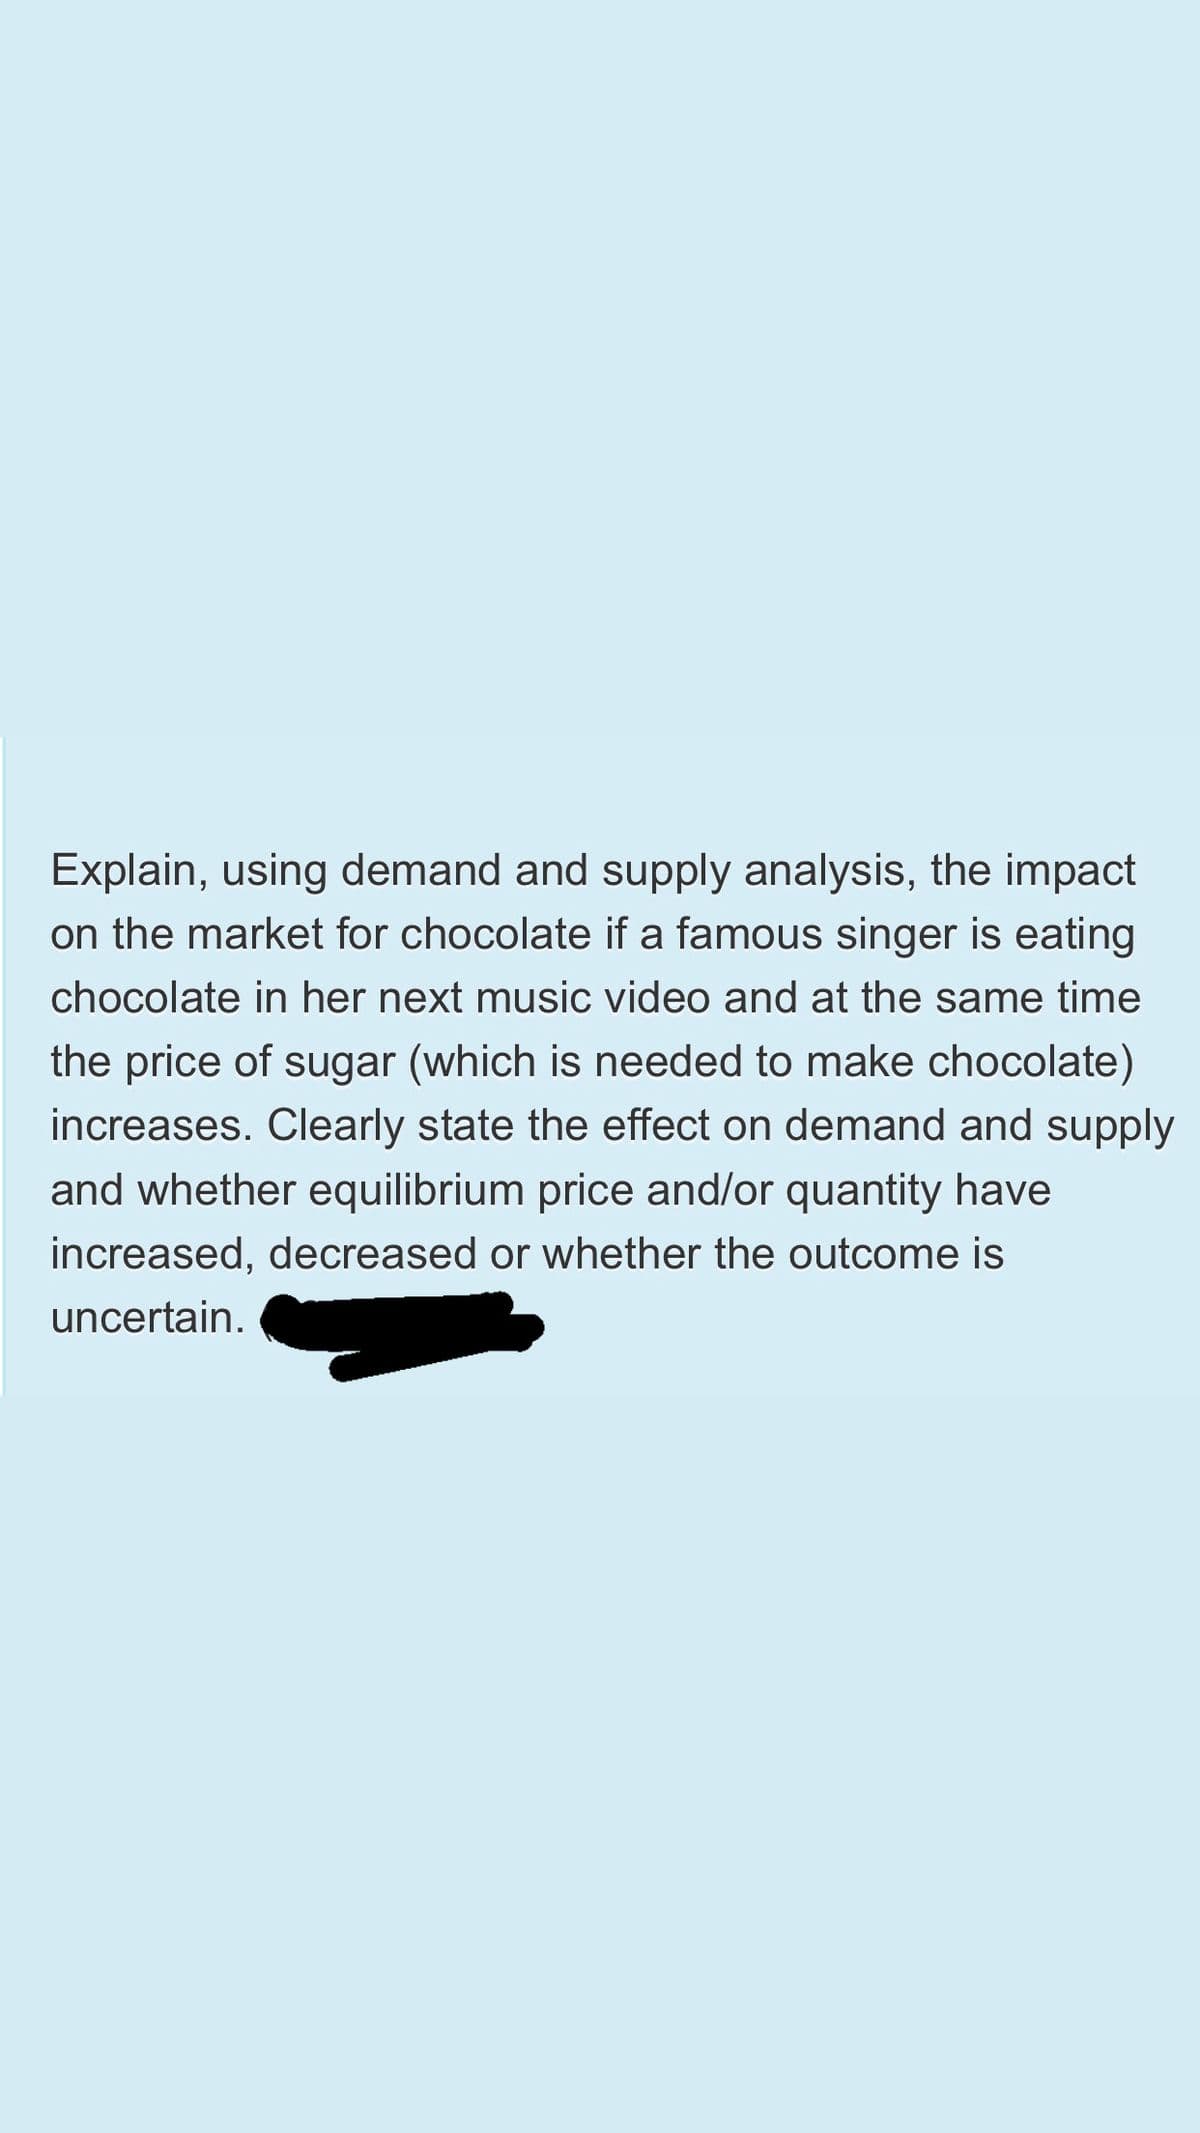 Explain, using demand and supply analysis, the impact
on the market for chocolate if a famous singer is eating
chocolate in her next music video and at the same time
the price of sugar (which is needed to make chocolate)
increases. Clearly state the effect on demand and supply
and whether equilibrium price and/or quantity have
increased, decreased or whether the outcome is
uncertain.
